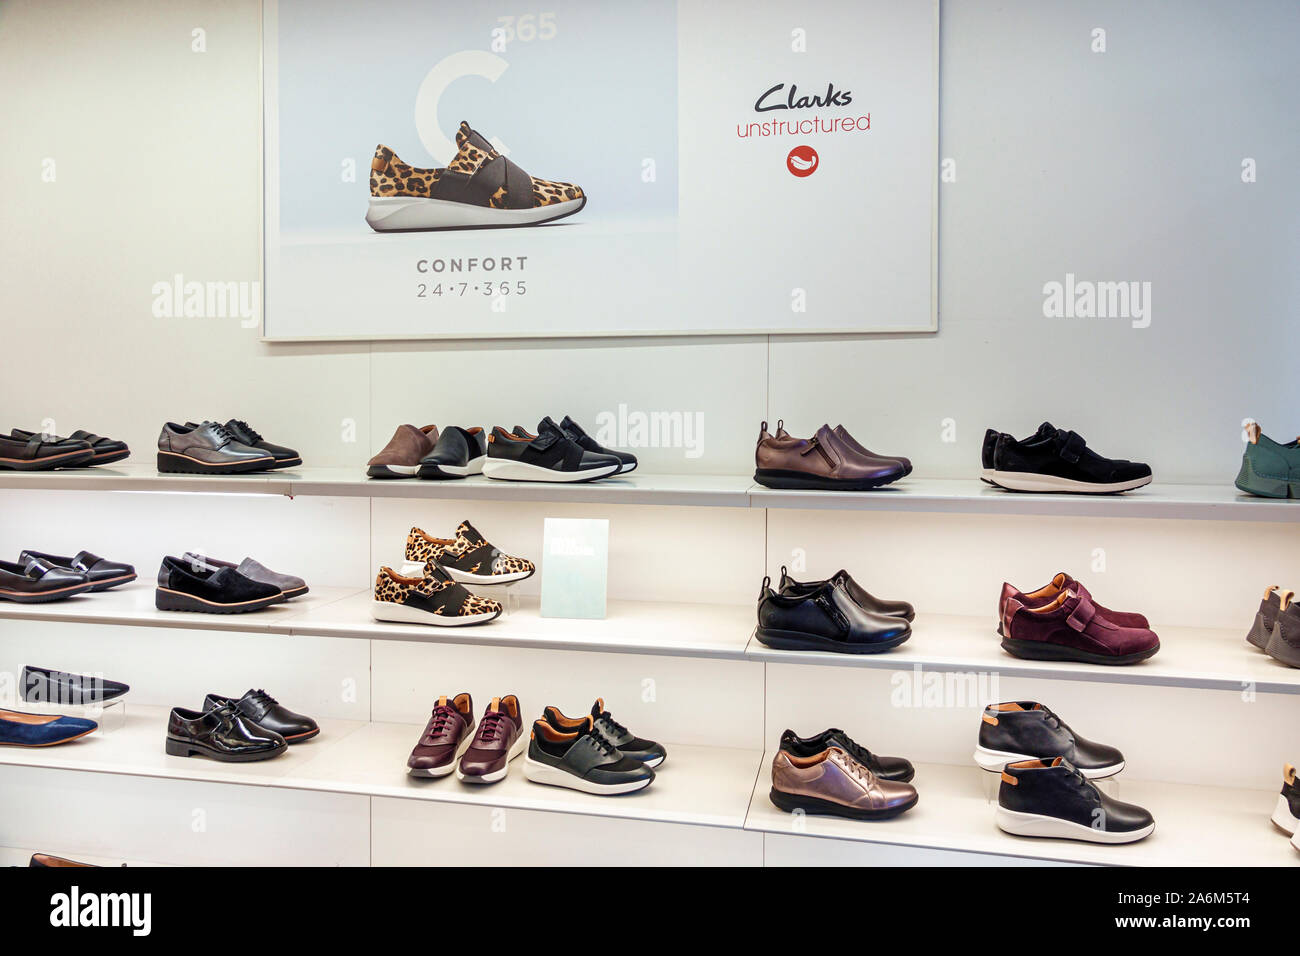 clarks shoes number of stores